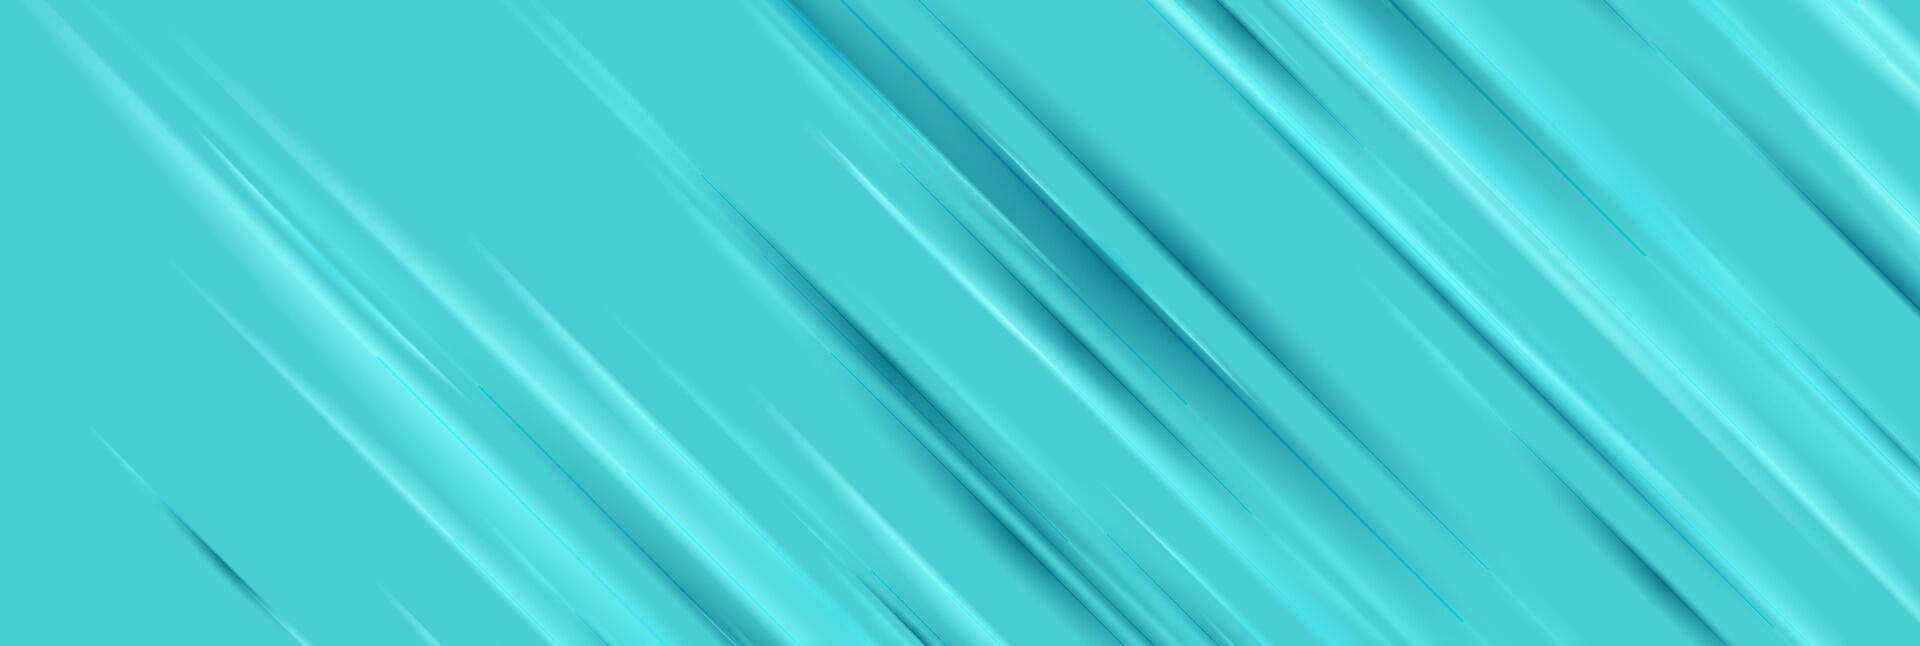 Smooth glossy stripes abstract modern tech background vector